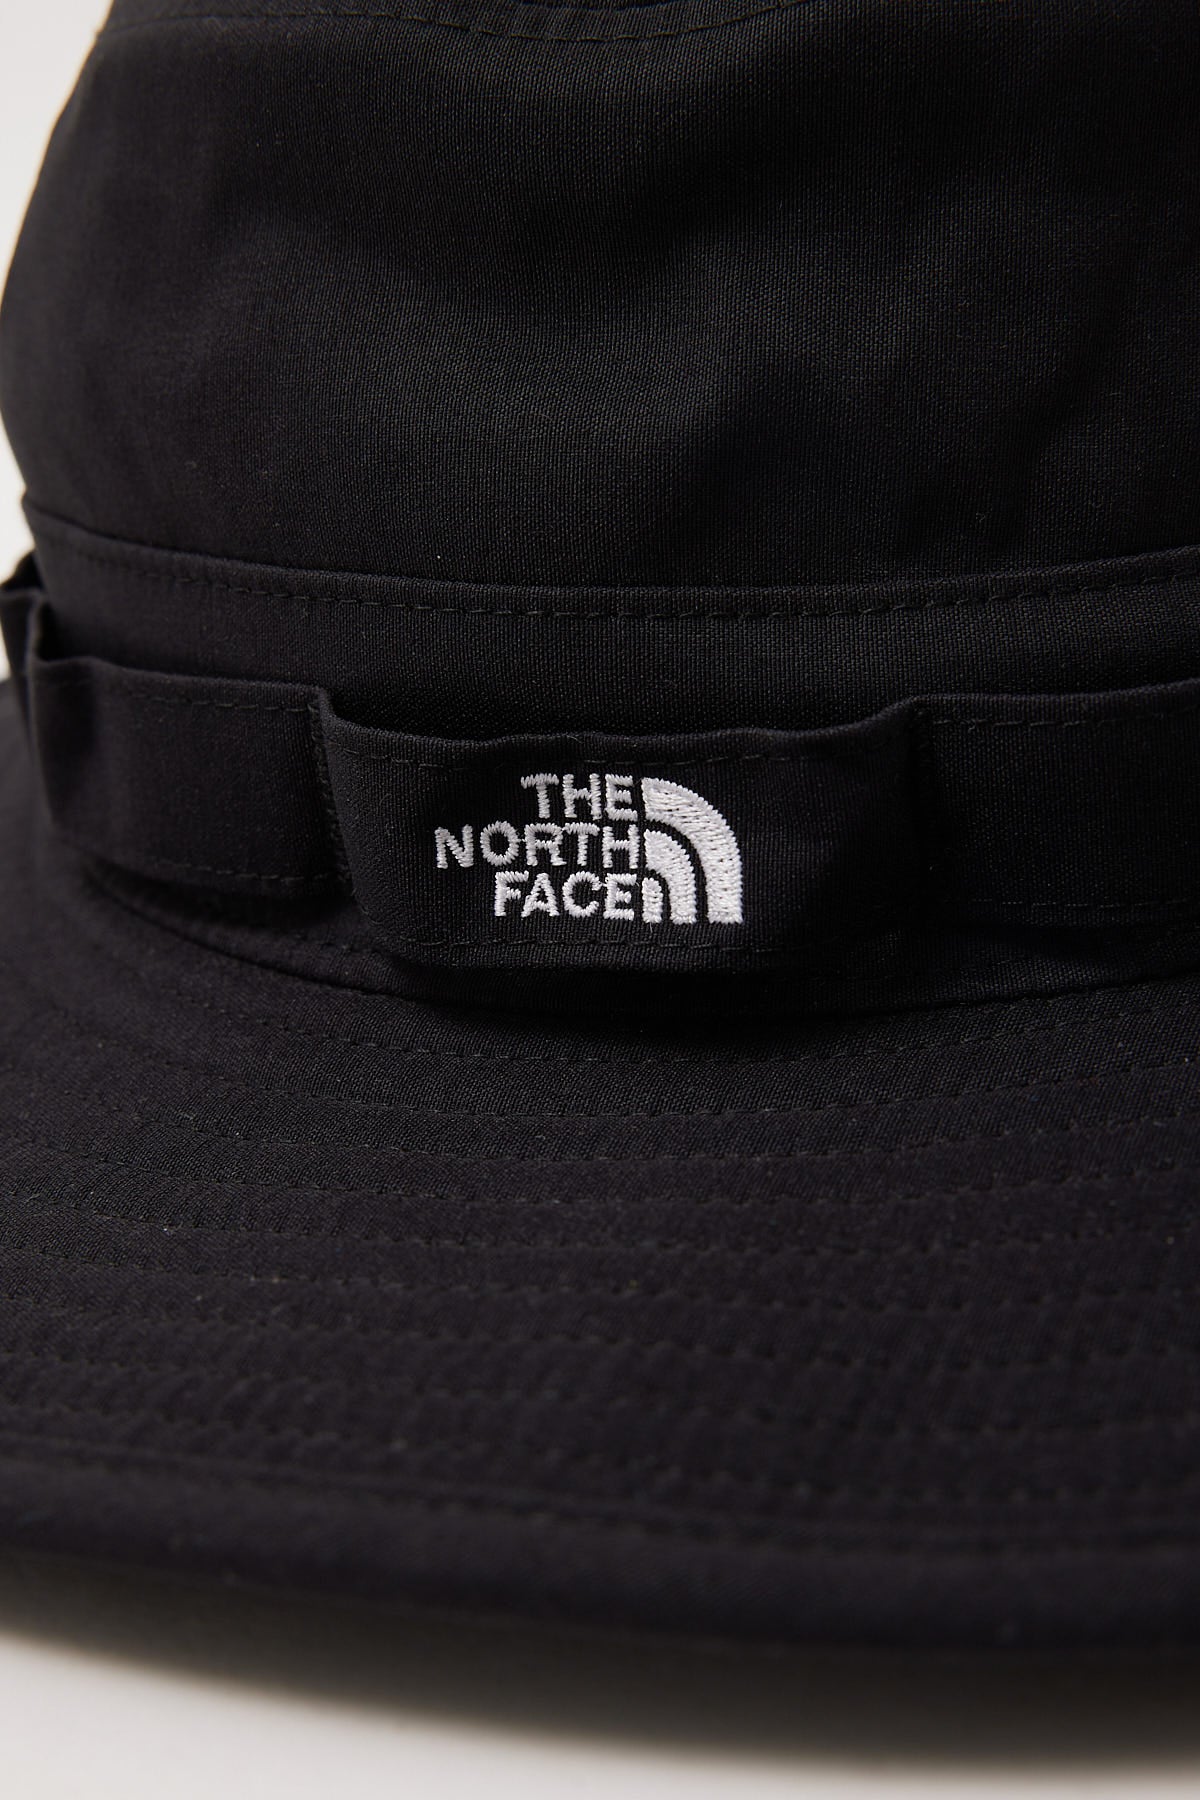 The North Face Class V Brimmer Black